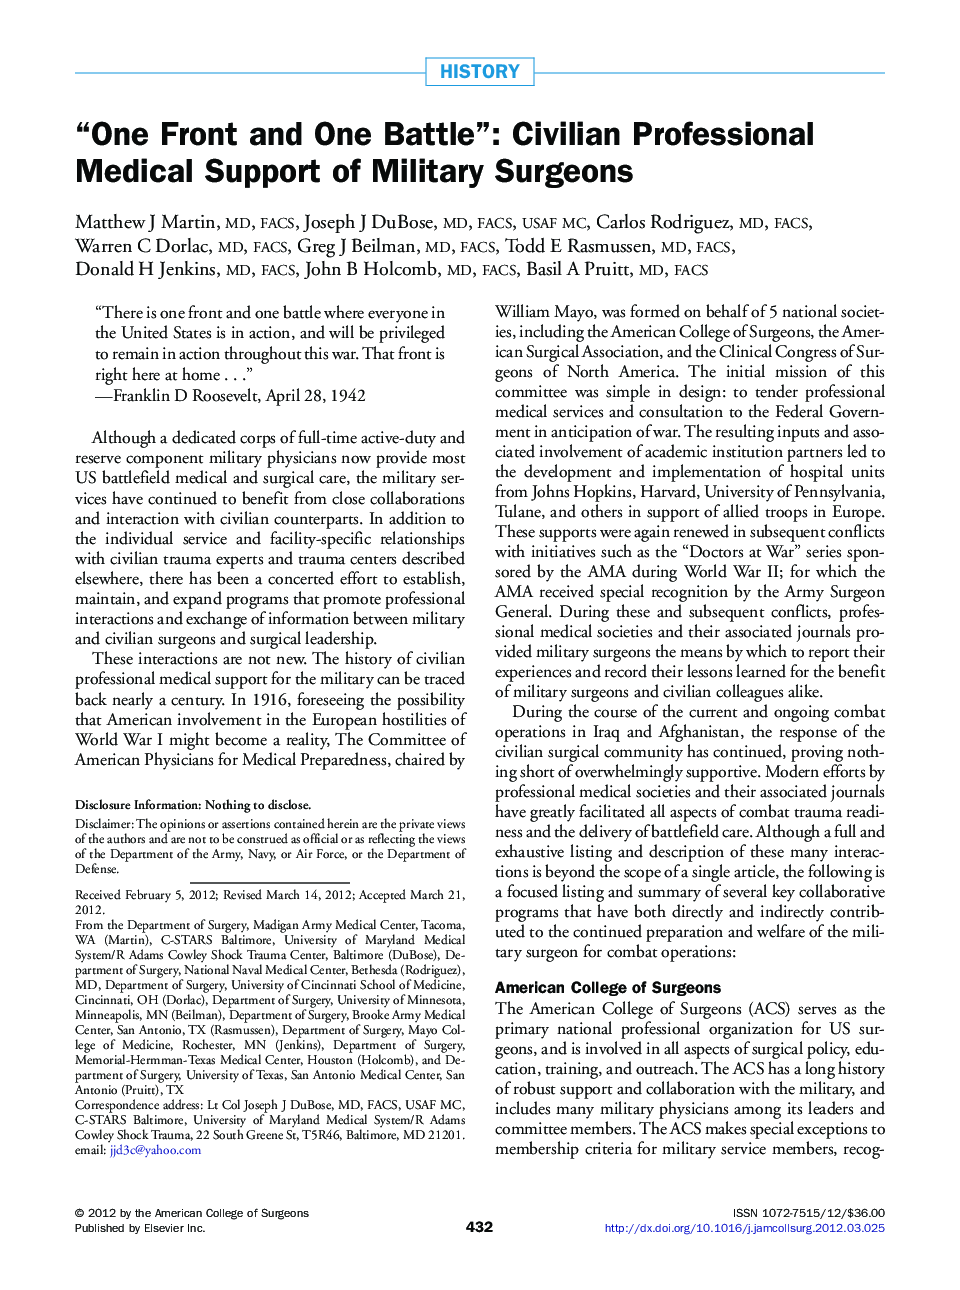 “One Front and One Battle”: Civilian Professional Medical Support of Military Surgeons